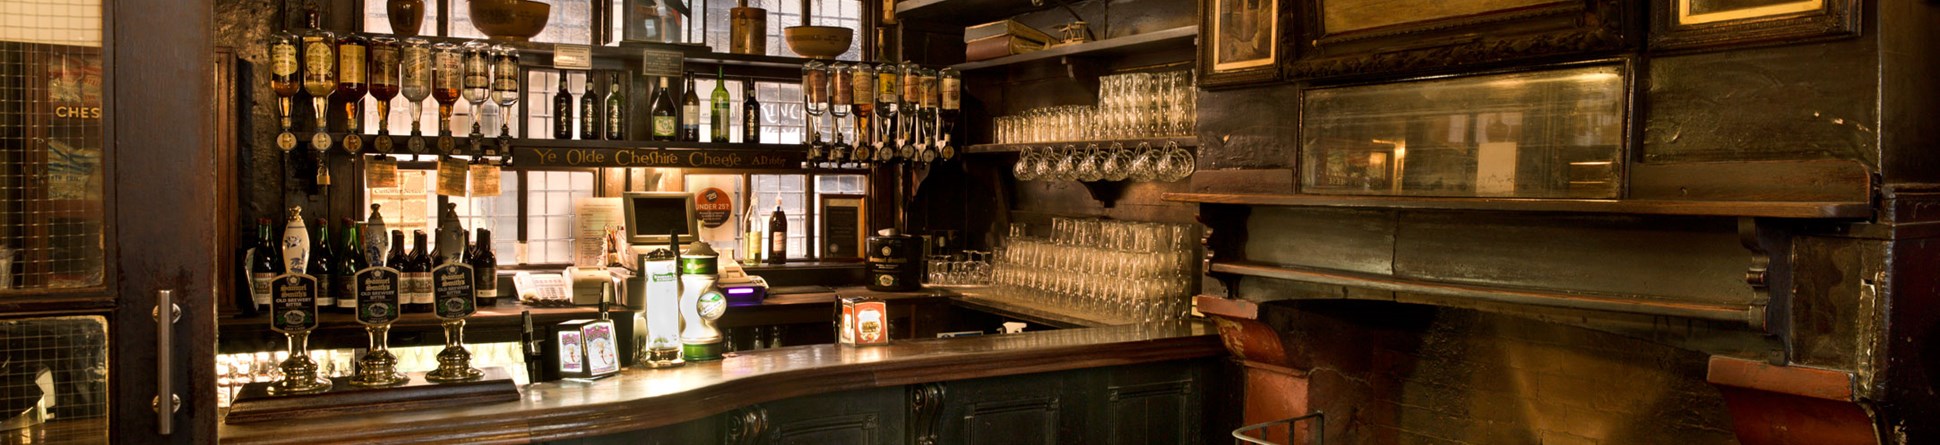 An interior detail of a bar area and fire place within a historic London public house.